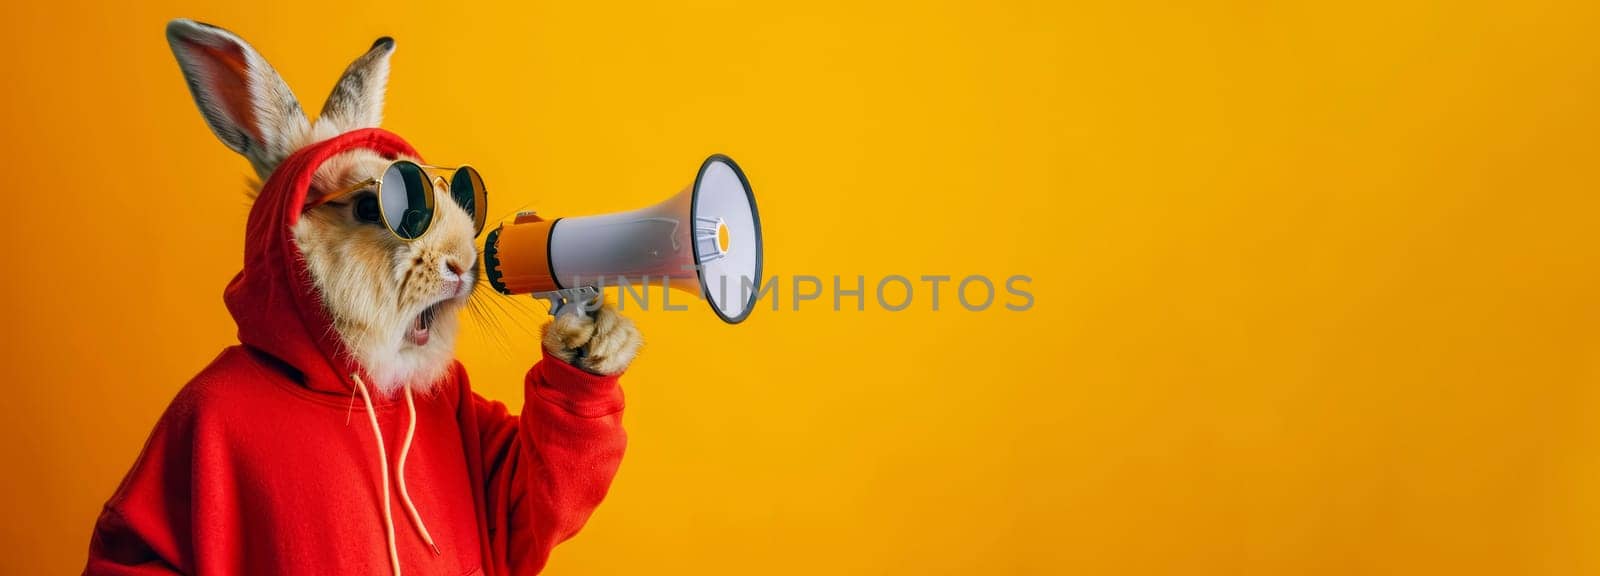 A humorous image of a rabbit in a red sweater and sunglasses holding a megaphone against a bright yellow background.